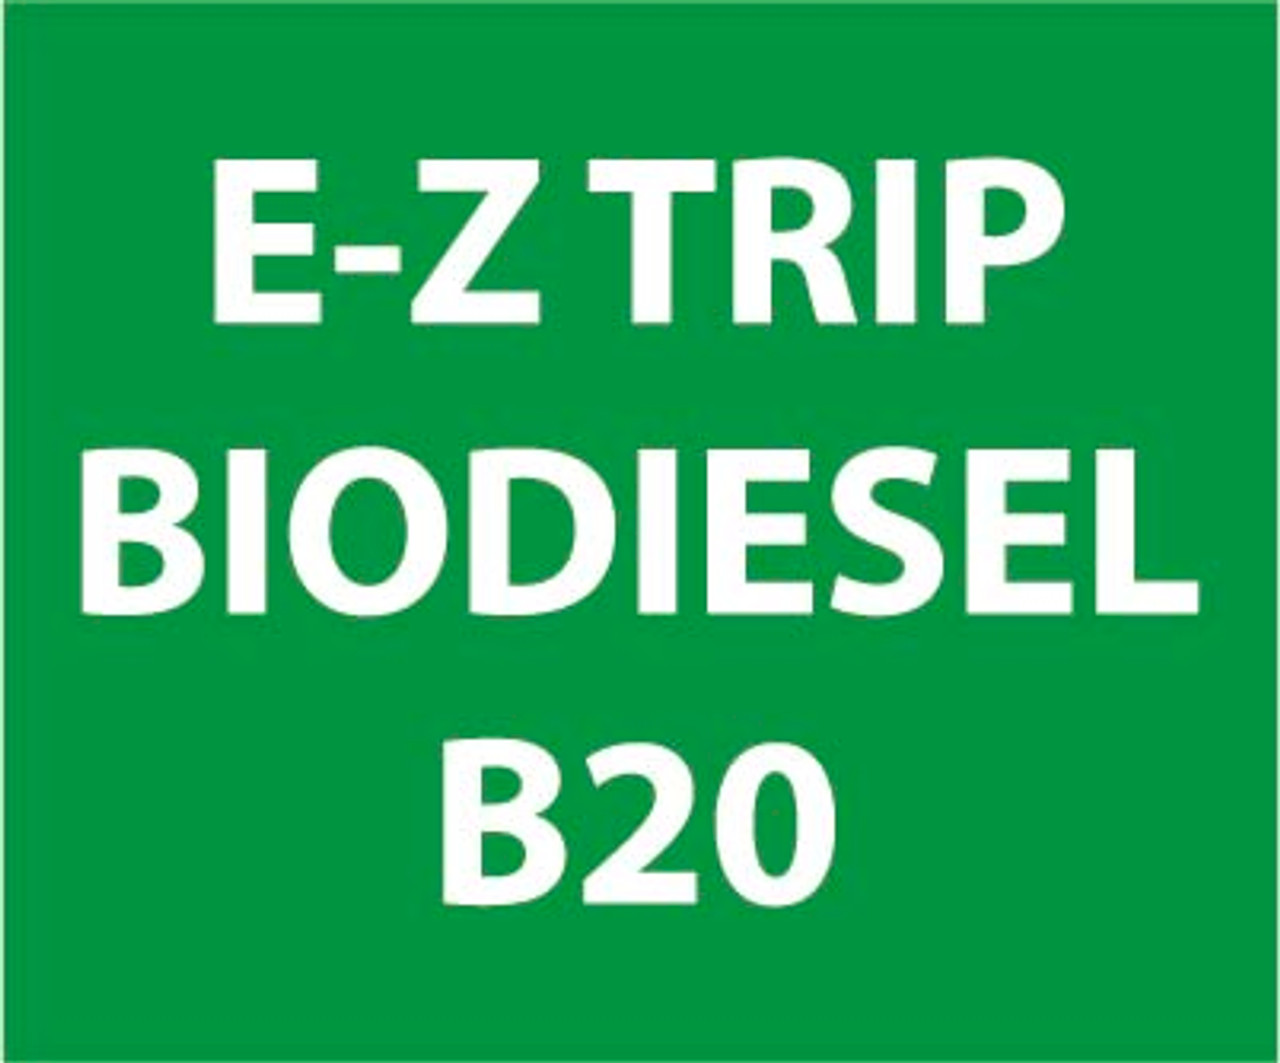 PID-EZB20 - 6" x 5" Decal